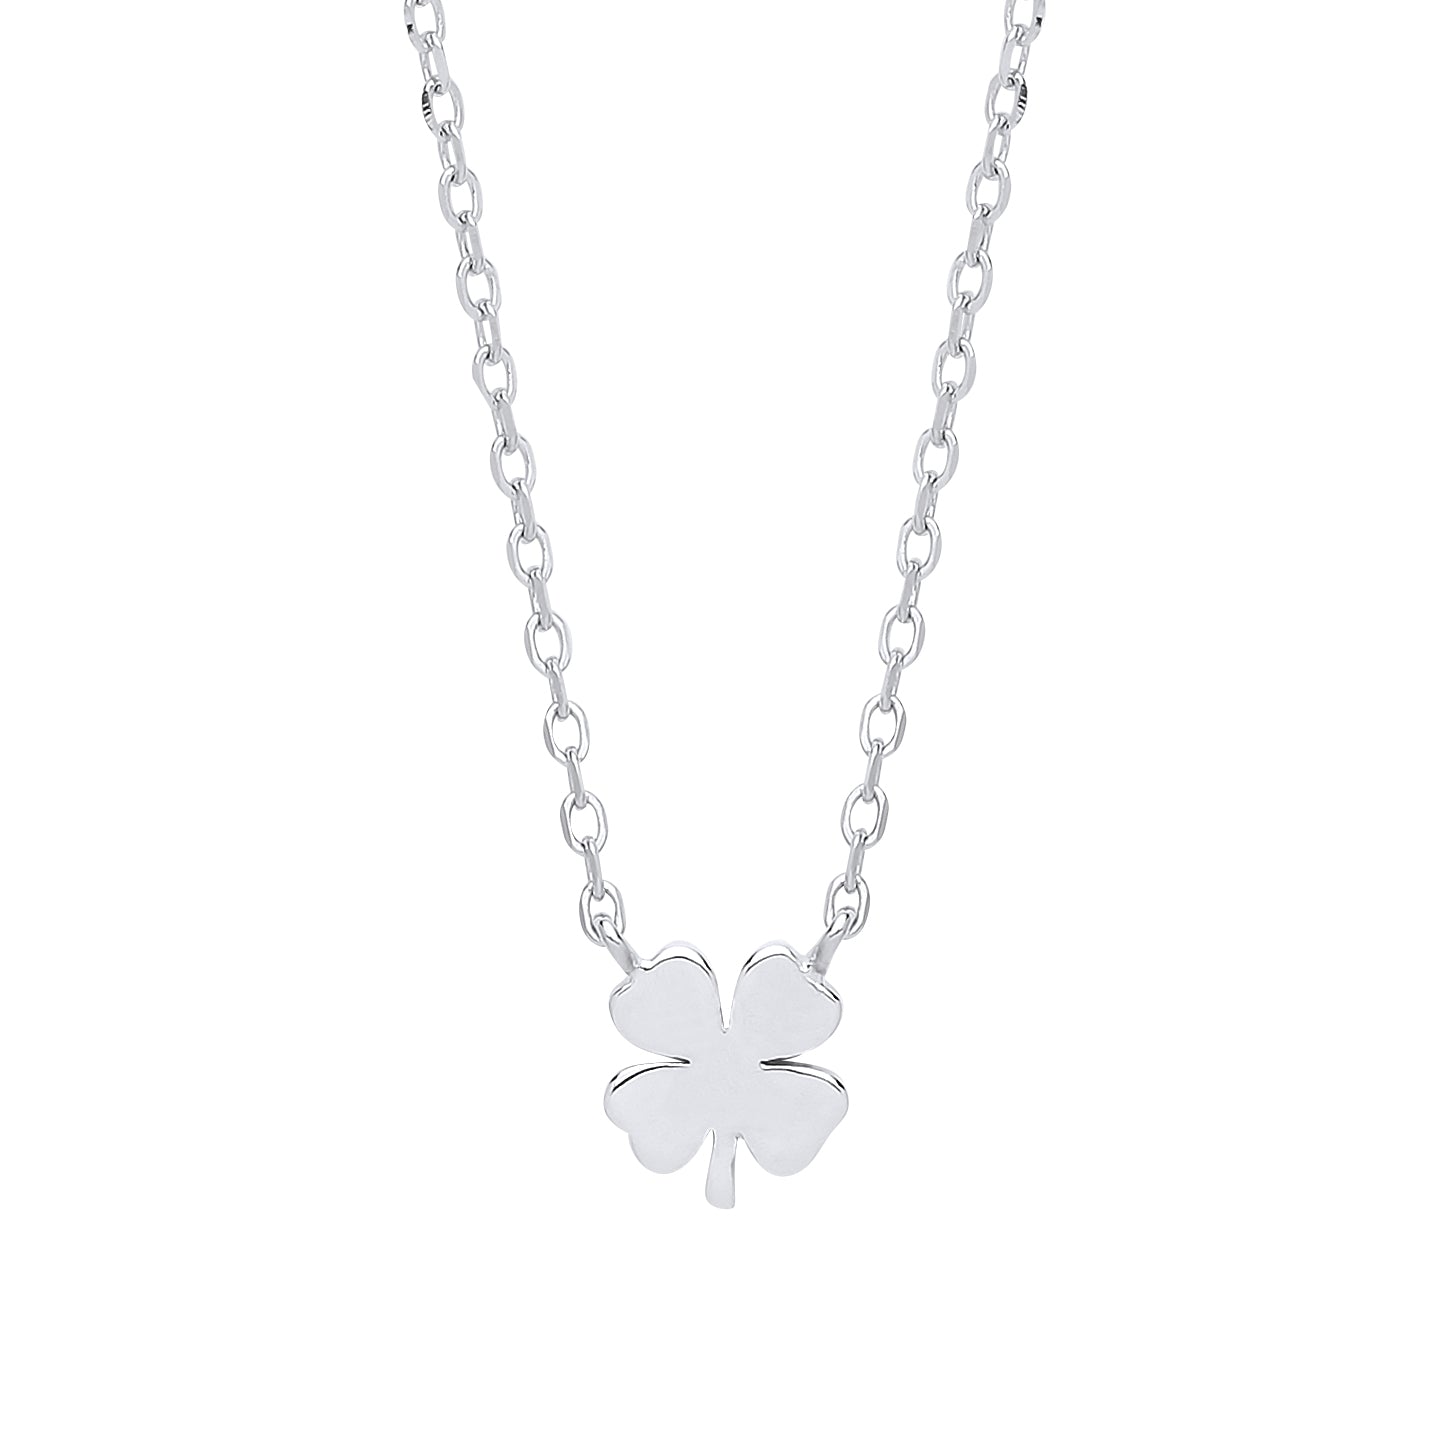 Silver  4 Leaf Clover Charm Necklace 16 inch - GVK275